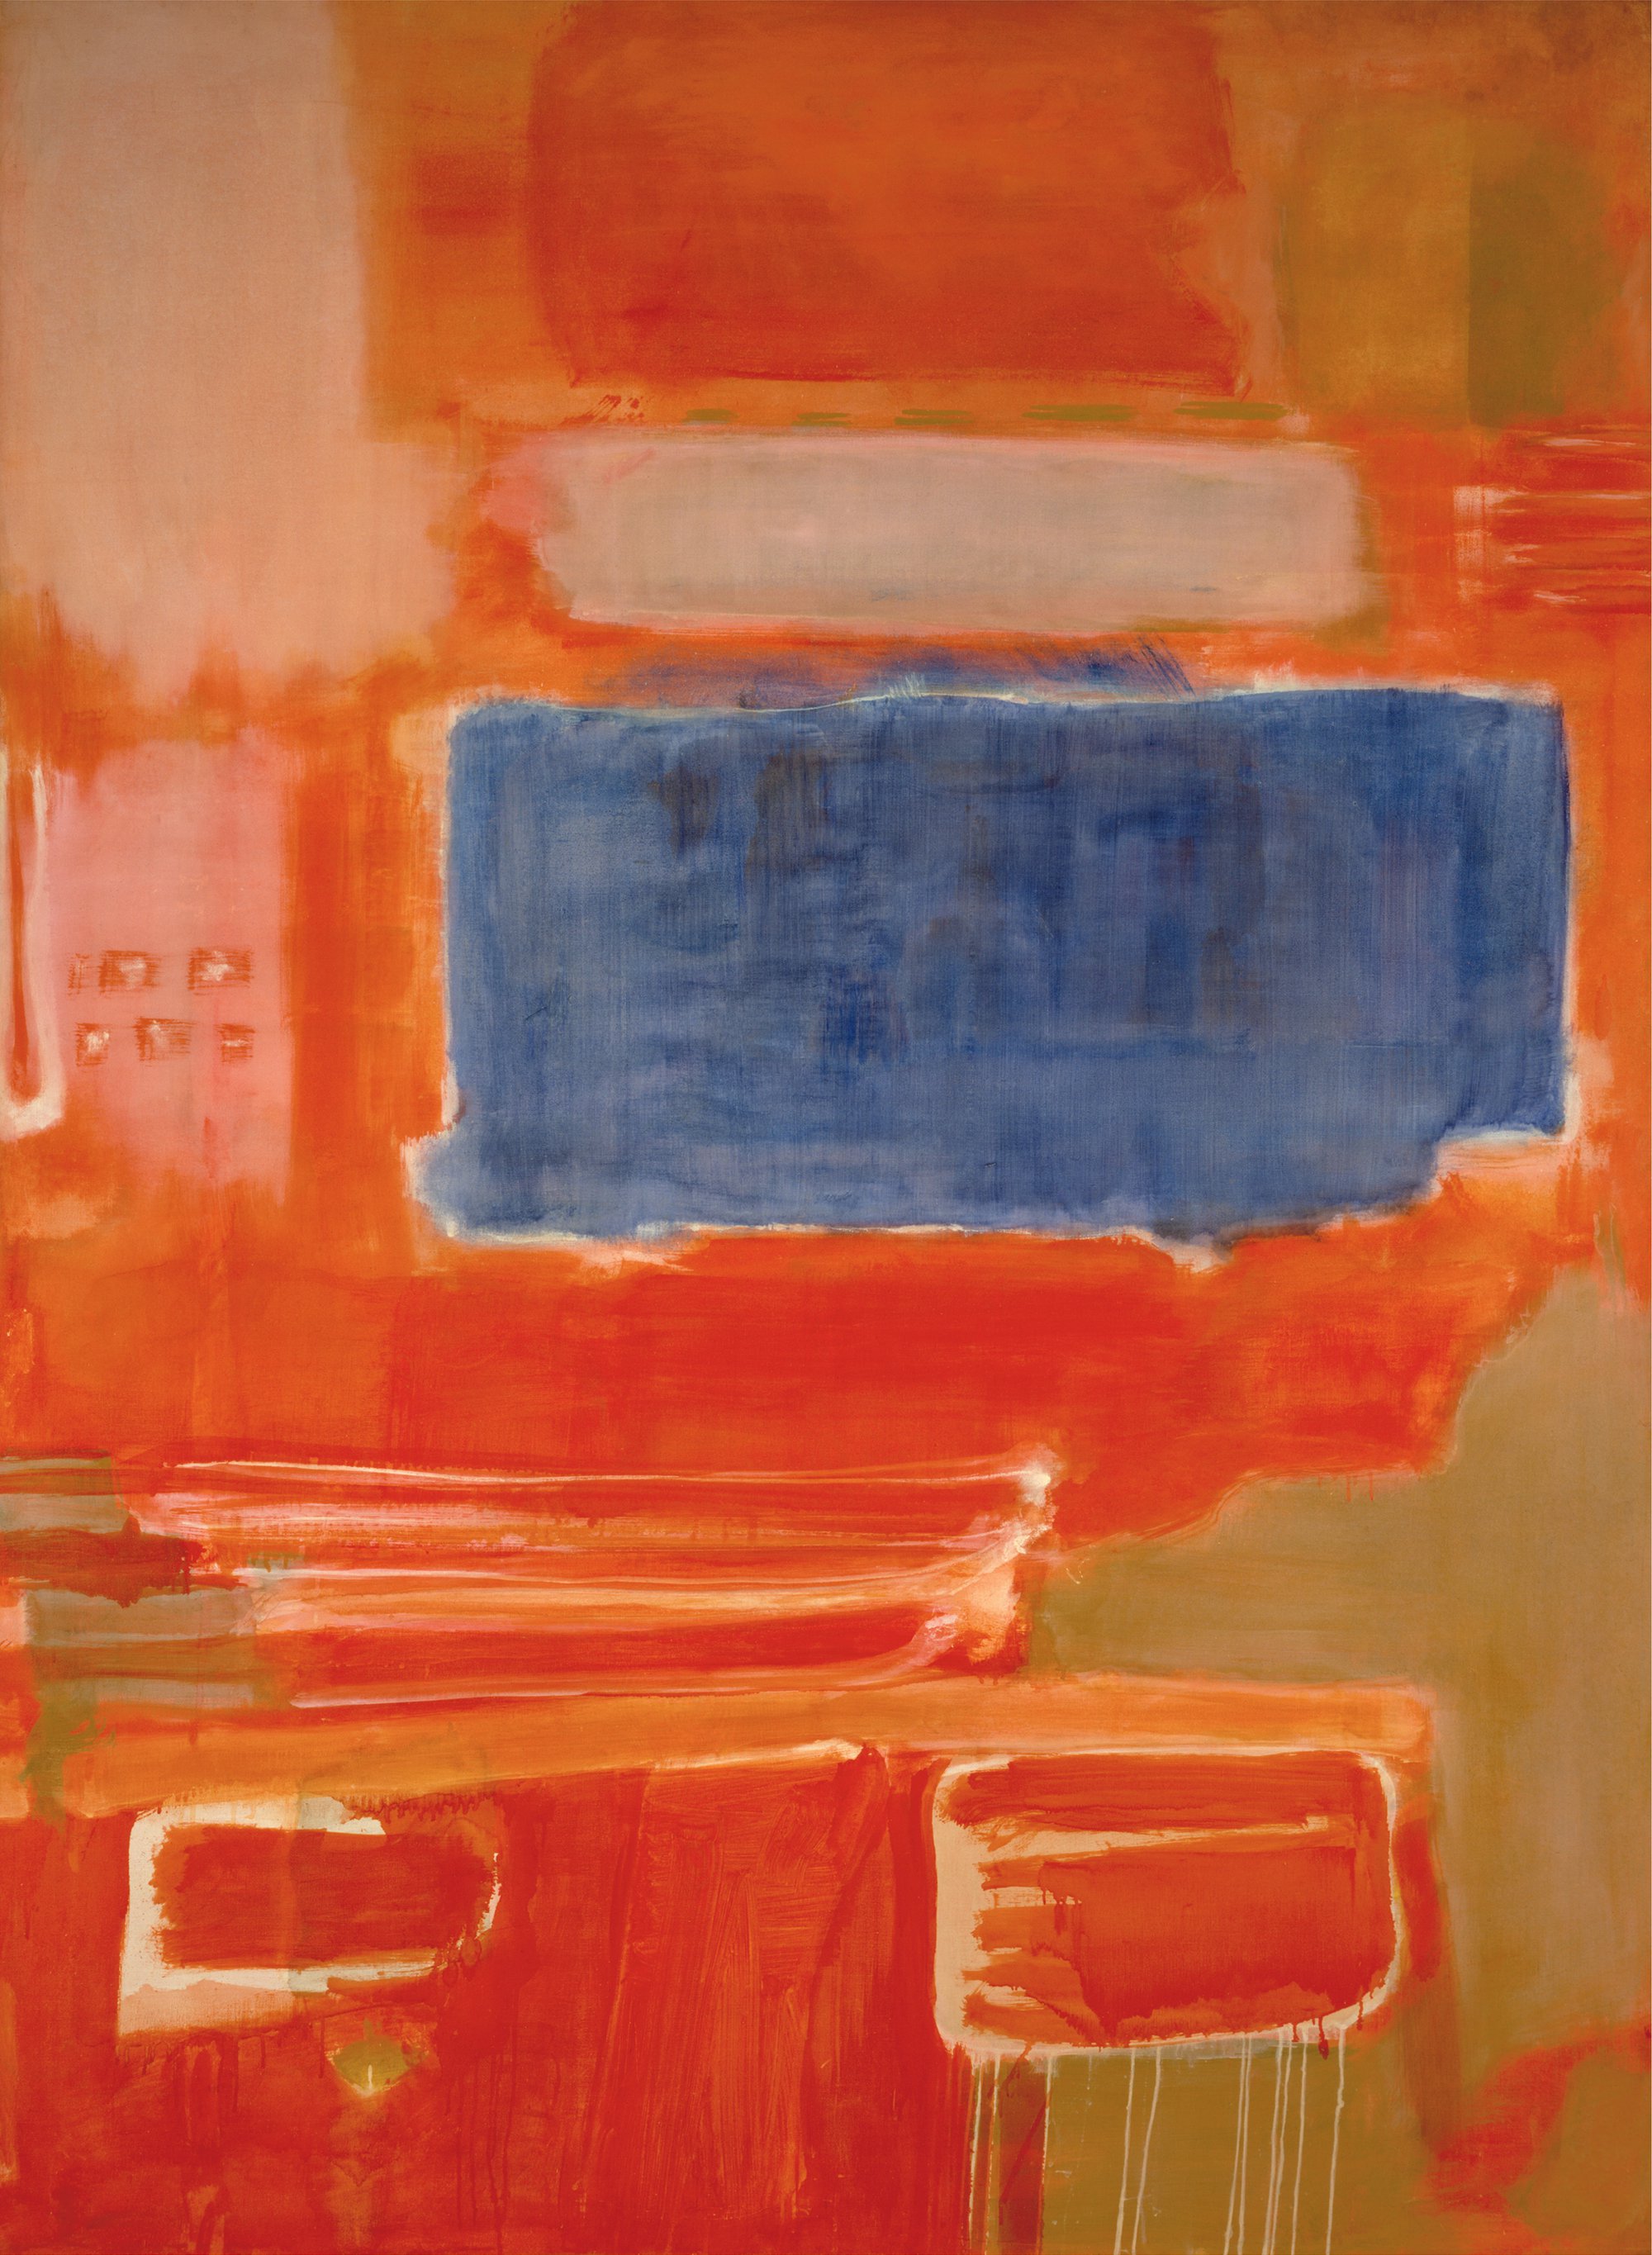 115 of Mark Rothko's paintings in Paris exhibition show how he sought to  express 'tragedy, death, ecstasy